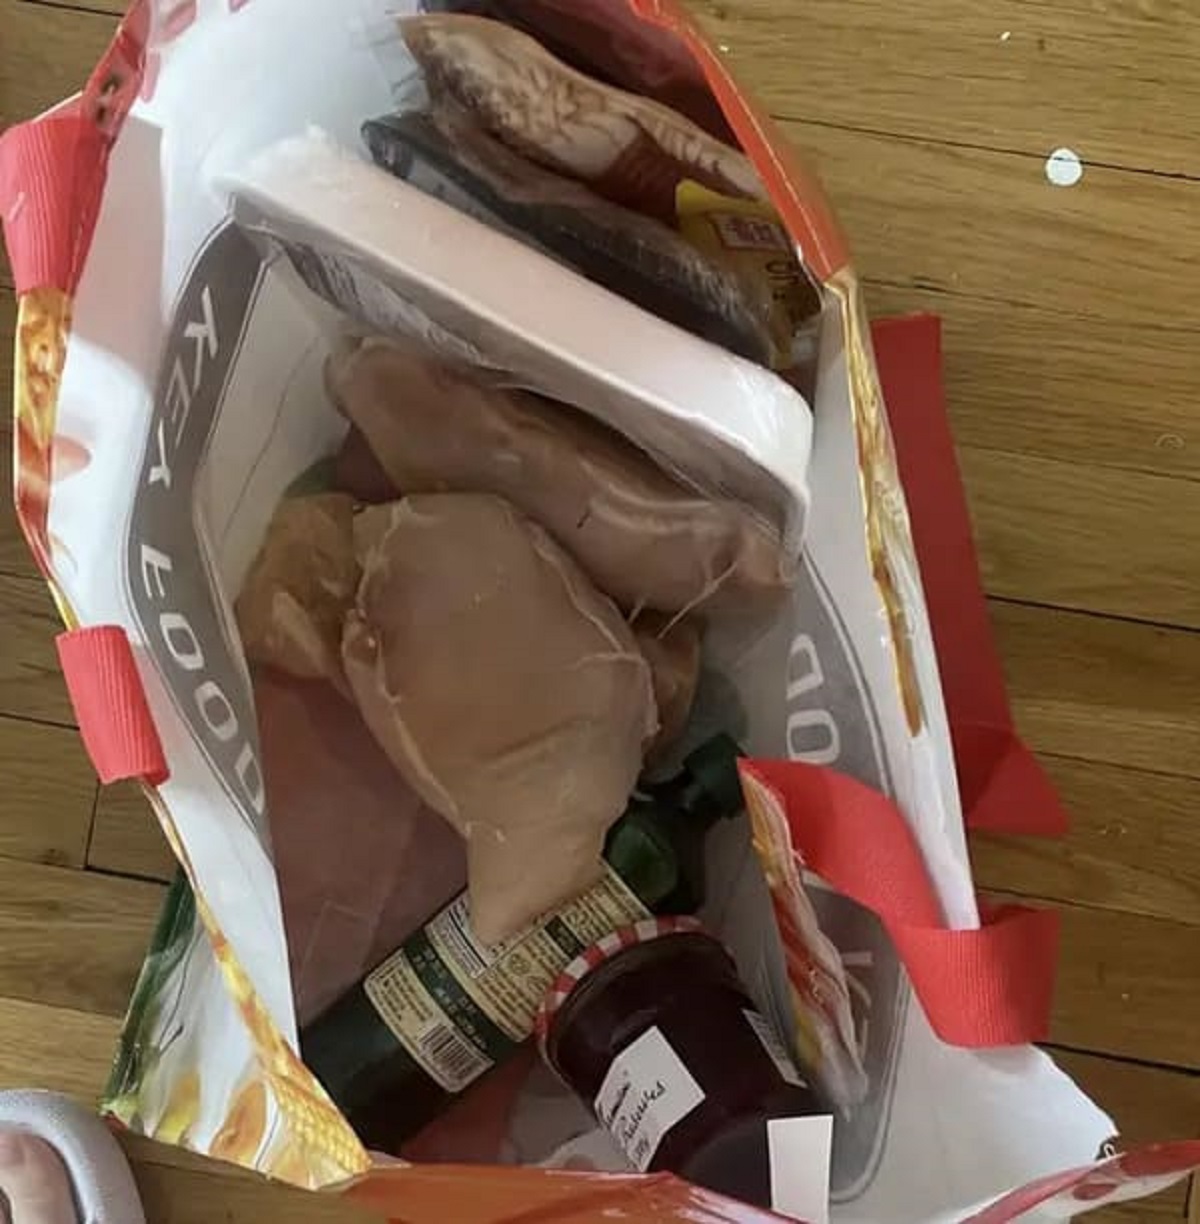 “Ordered from Instacart for the first time and this is how the chicken came”